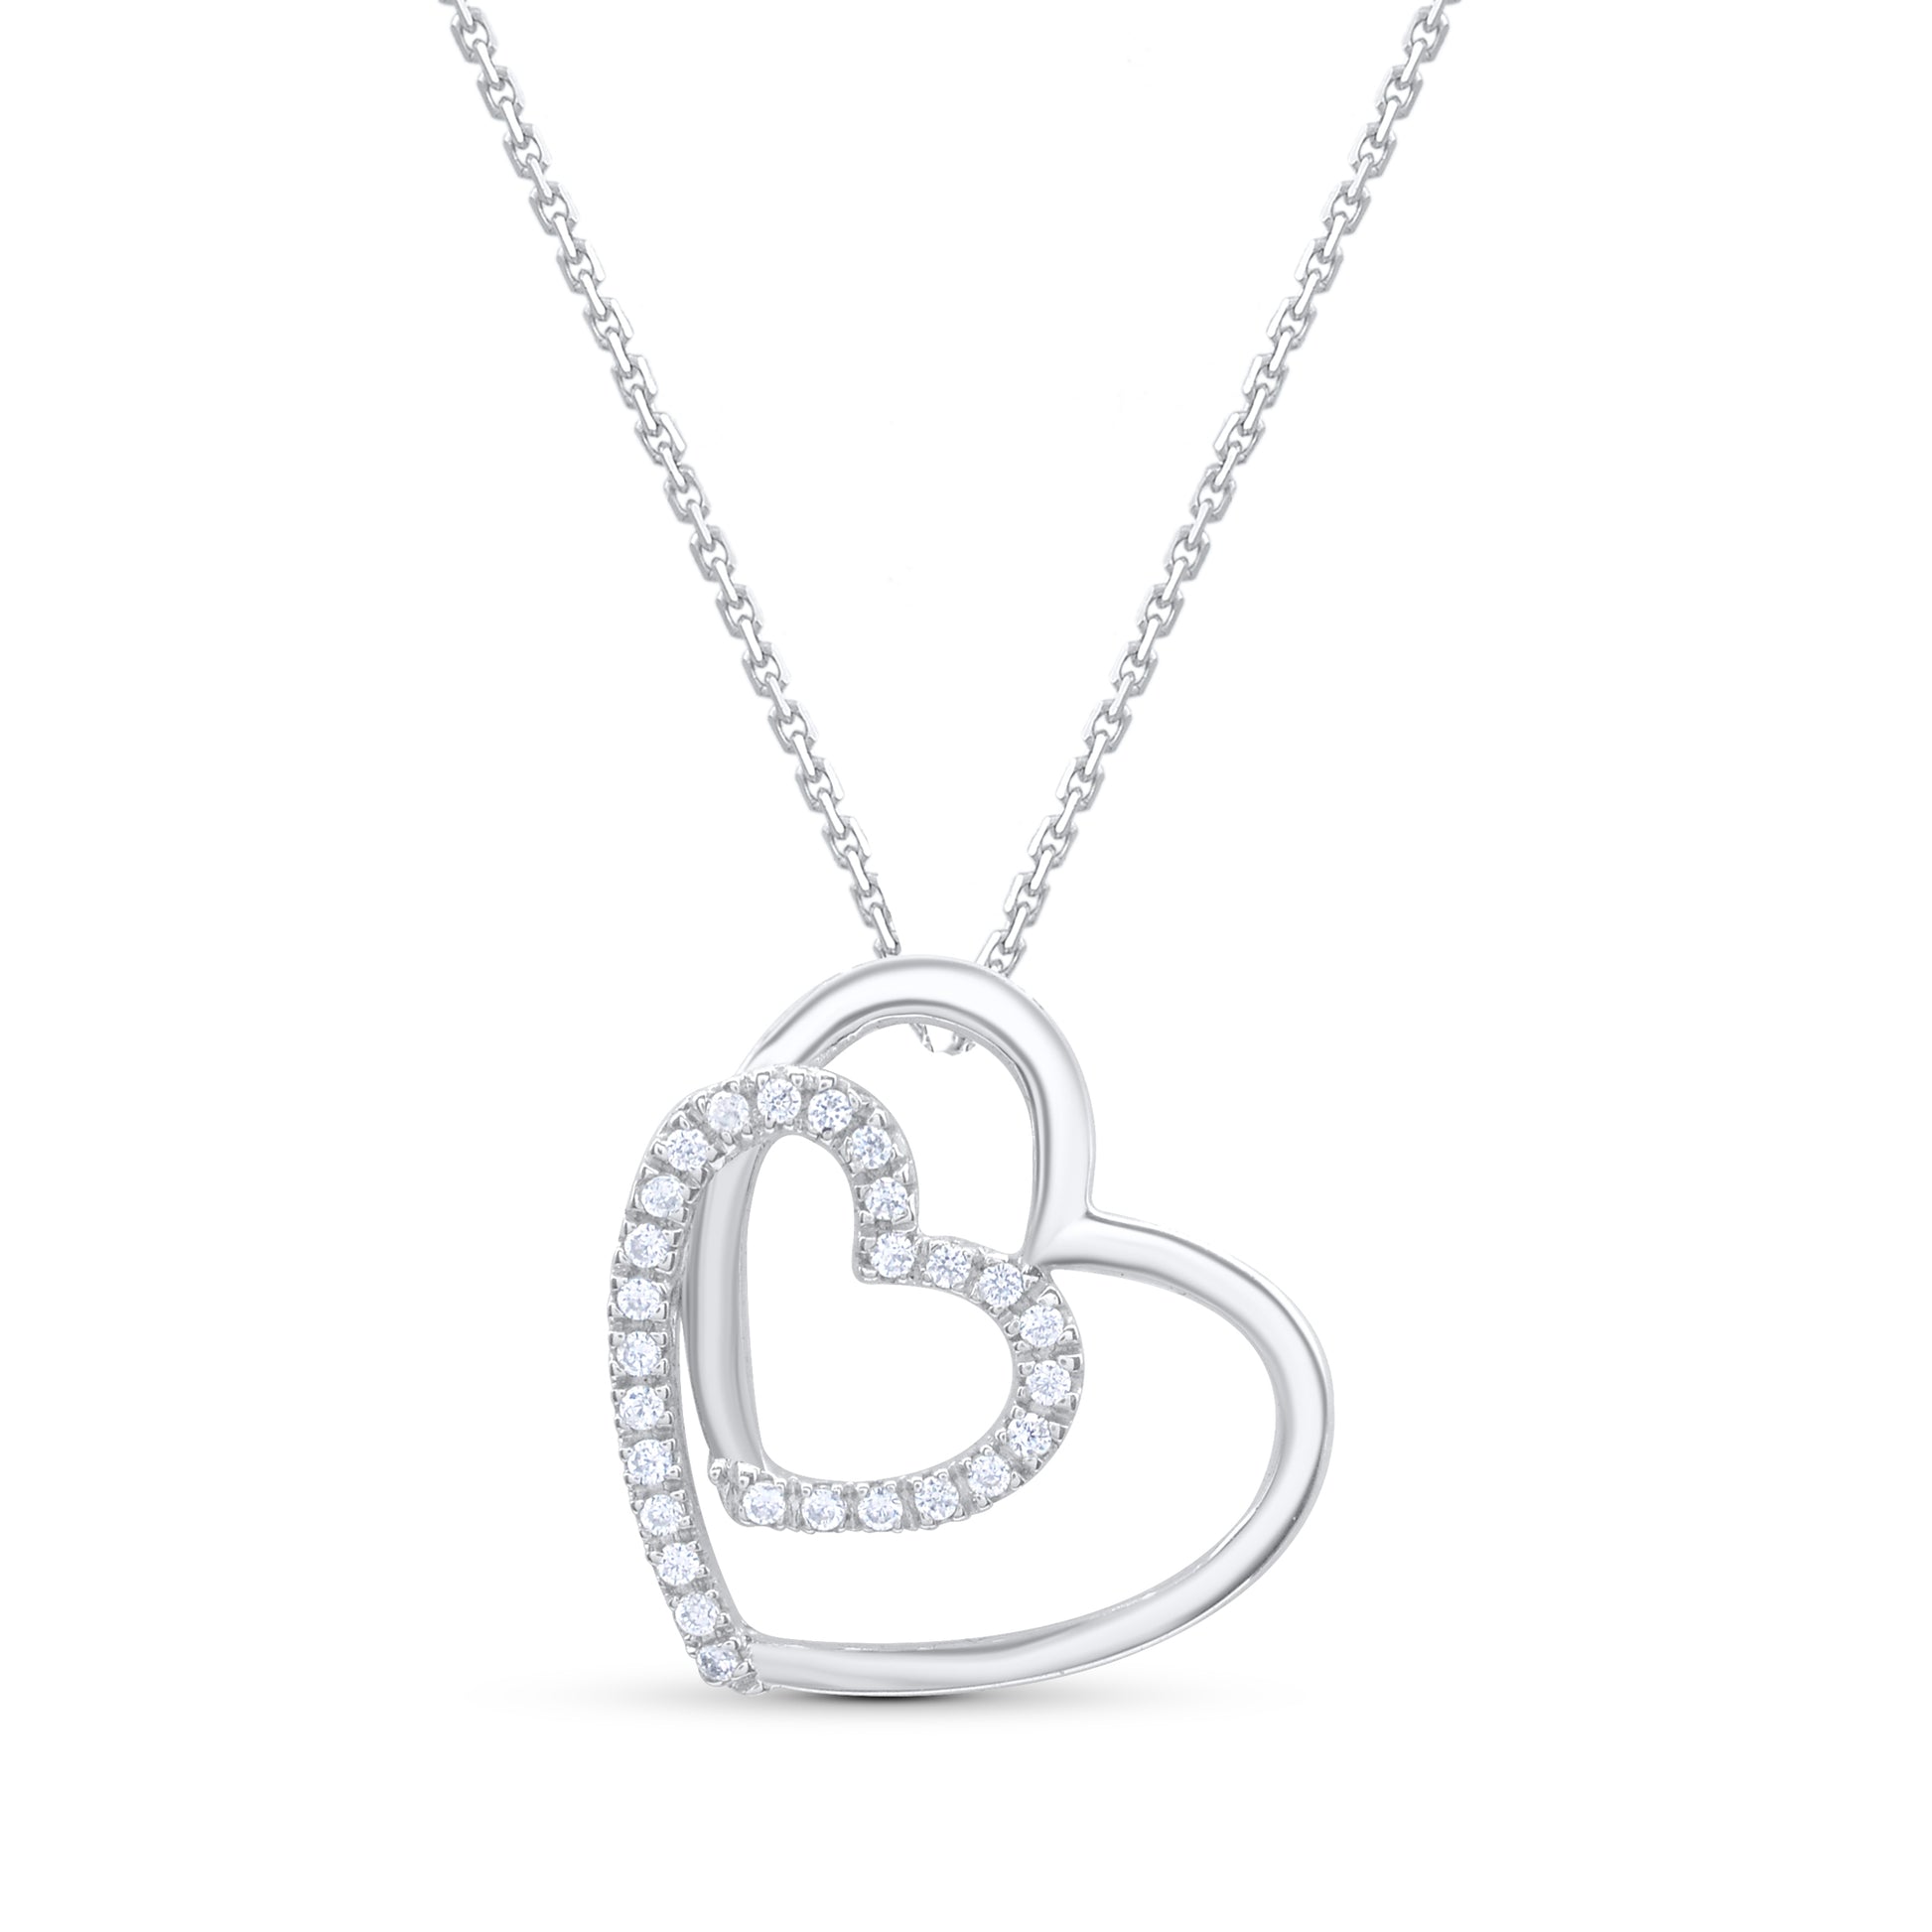 Intertwined Heart Pendant Necklace 